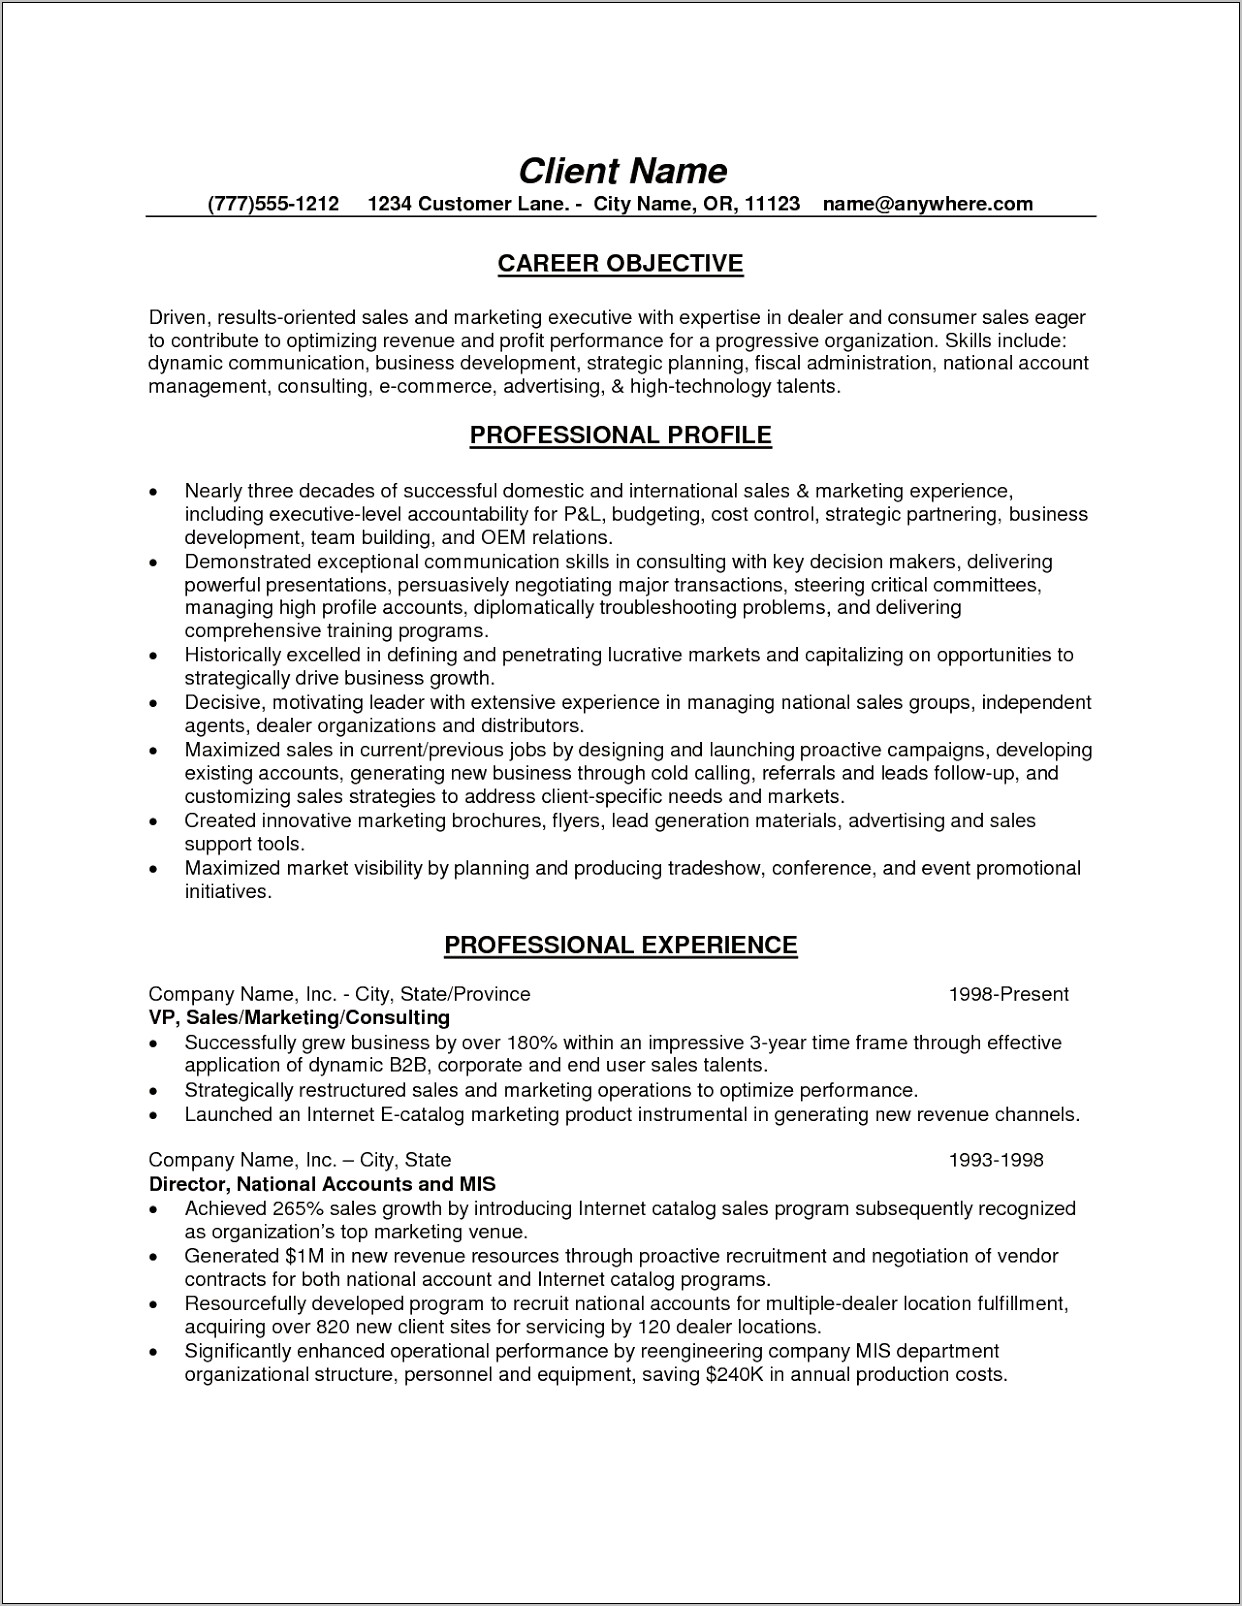 Management Consultant Resume Objective Samples